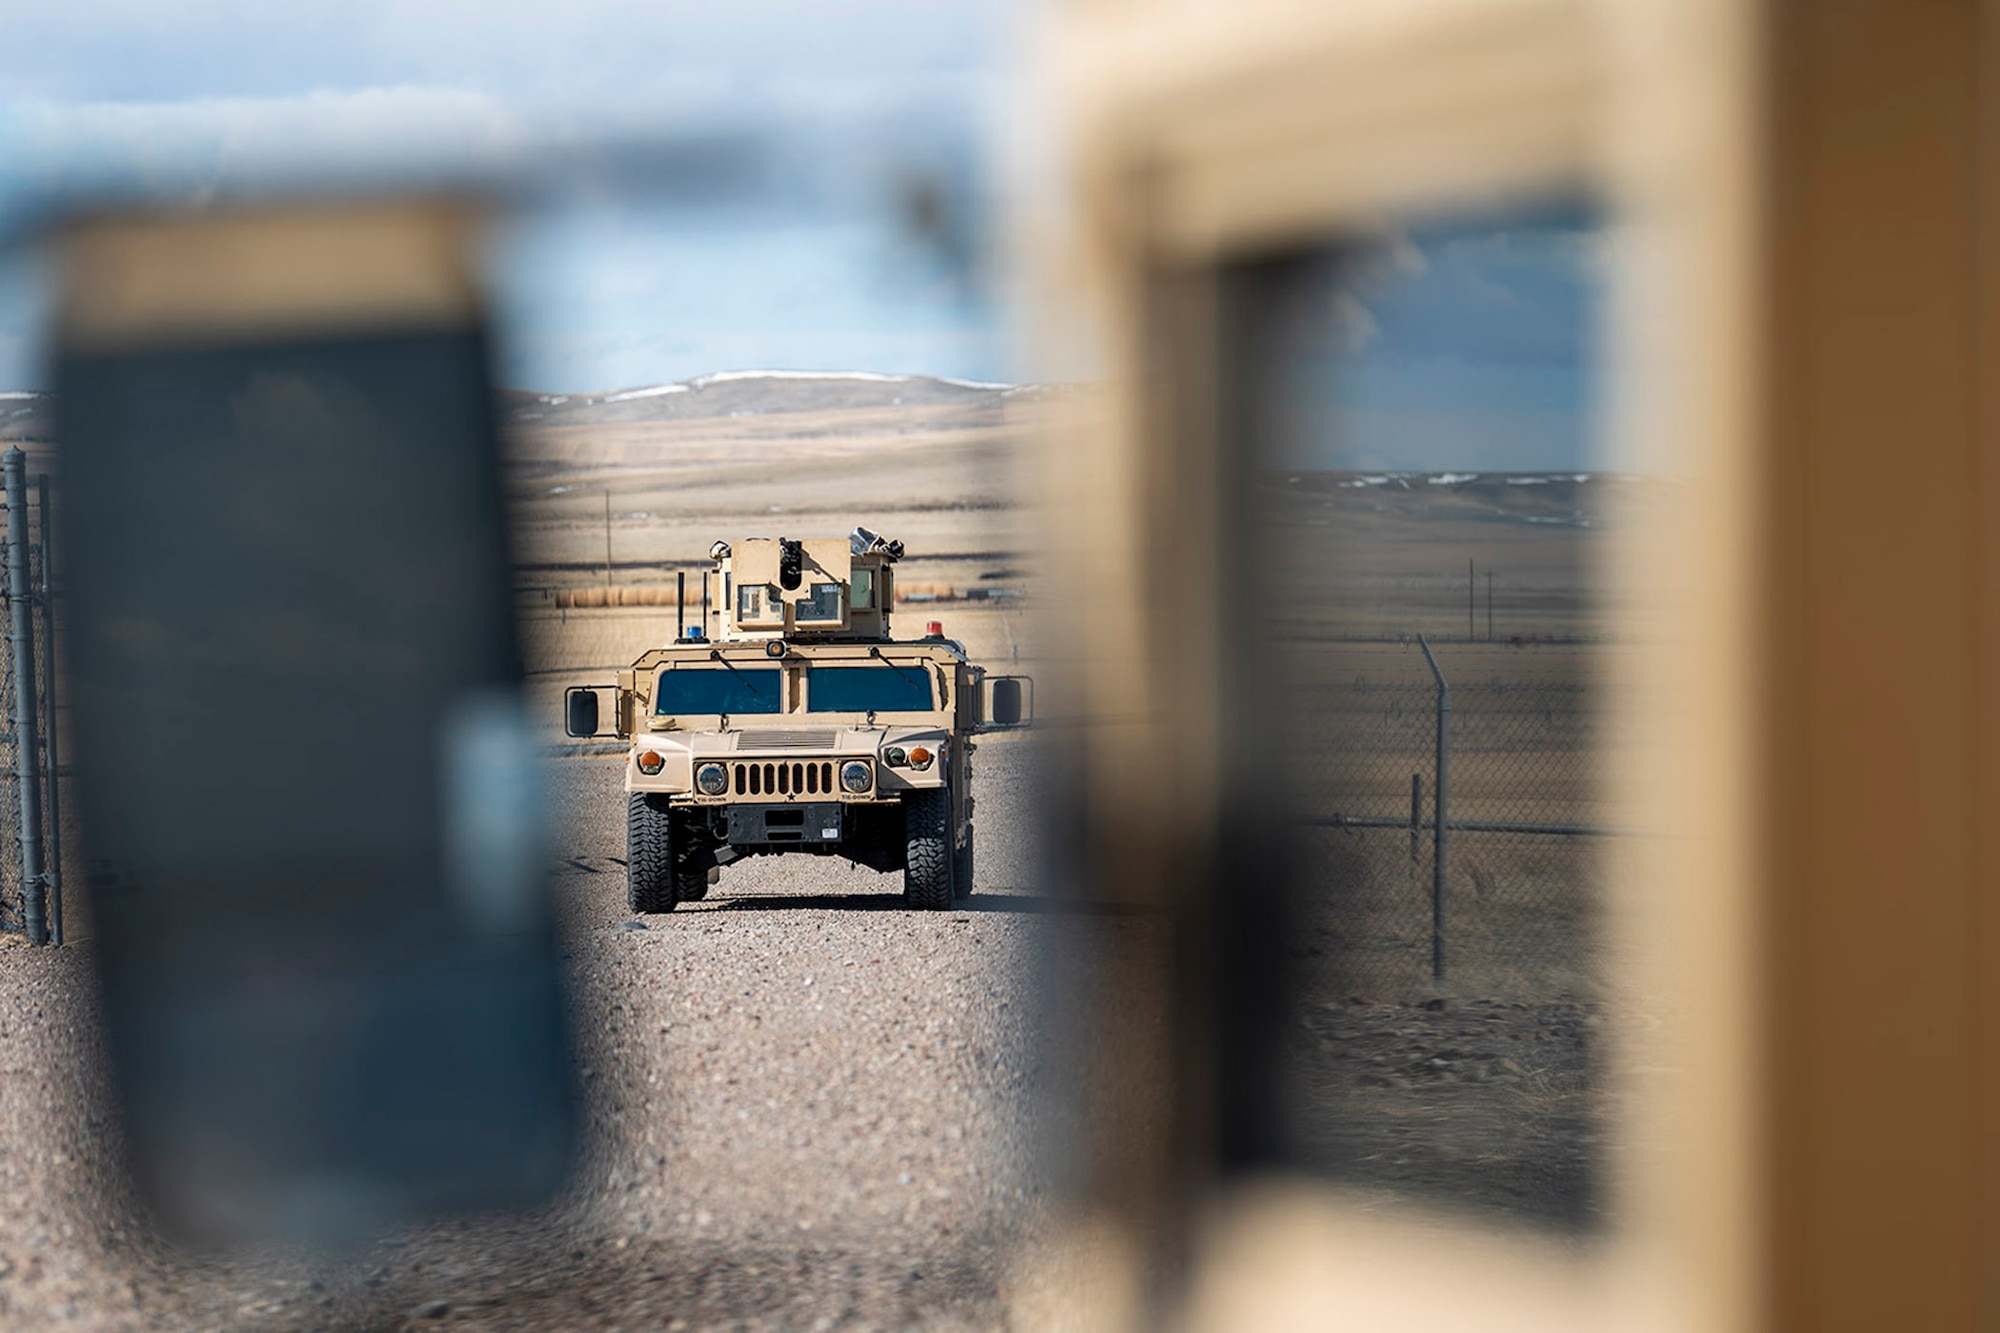 A Humvee enters the gates of a missile launch facility during a training exercise April 19, 2022, near Malmstrom Air Force Base, Mont. The Humvee was manned by 841st Missile Security Forces Squadron defenders, who responded to a threat from simulated armed combatants during the training scenario. (U.S. Air Force photo by Airman 1st Class Elijah Van Zandt)